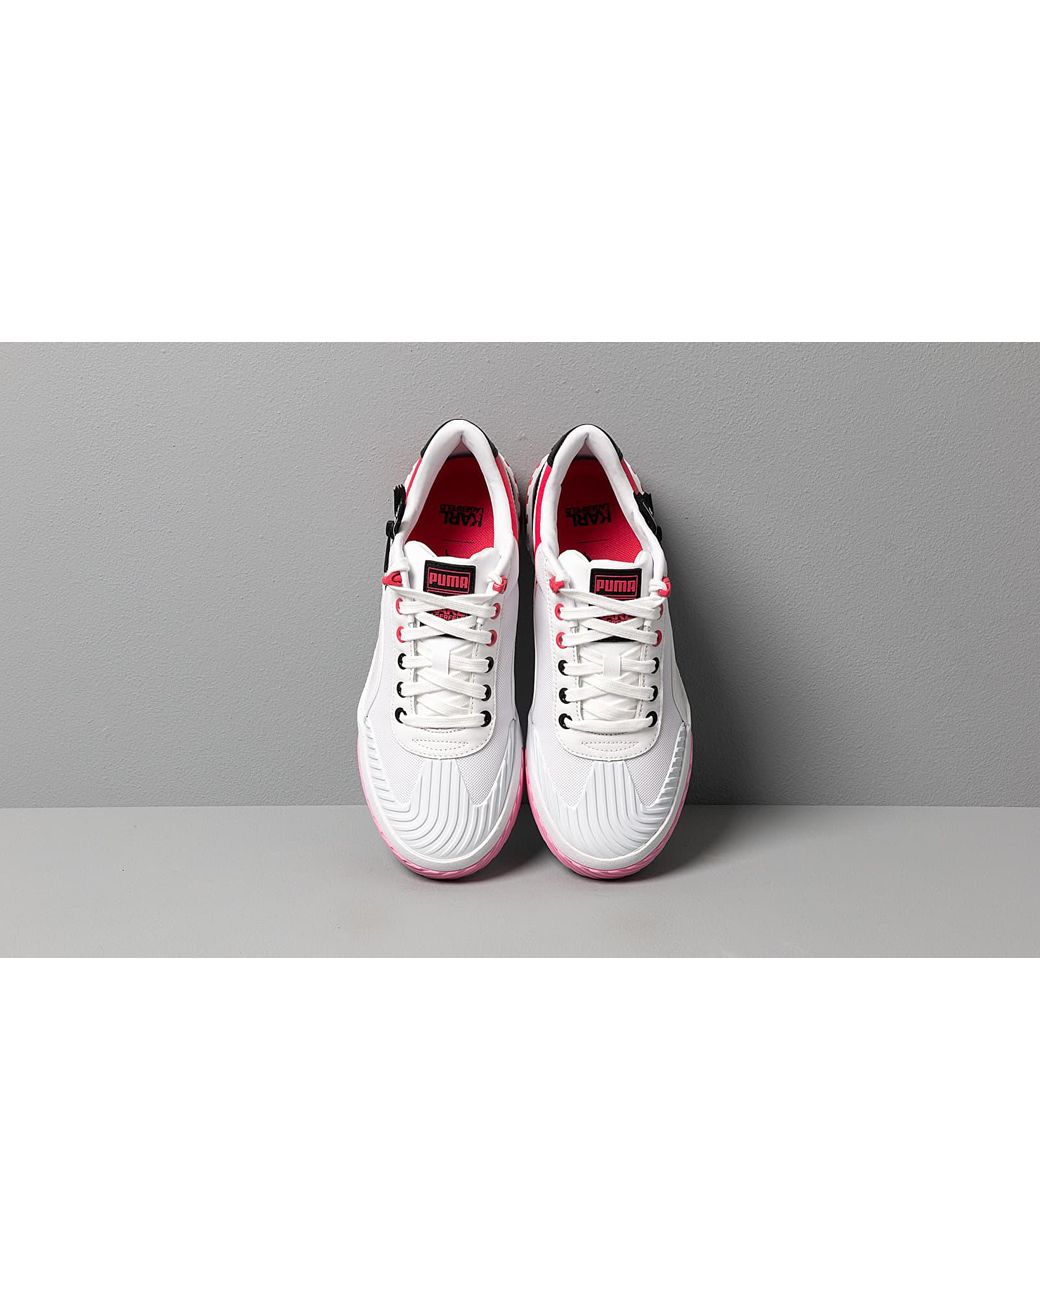 PUMA Leather X Karl Lagerfeld Cali Sneakers in White | Lyst